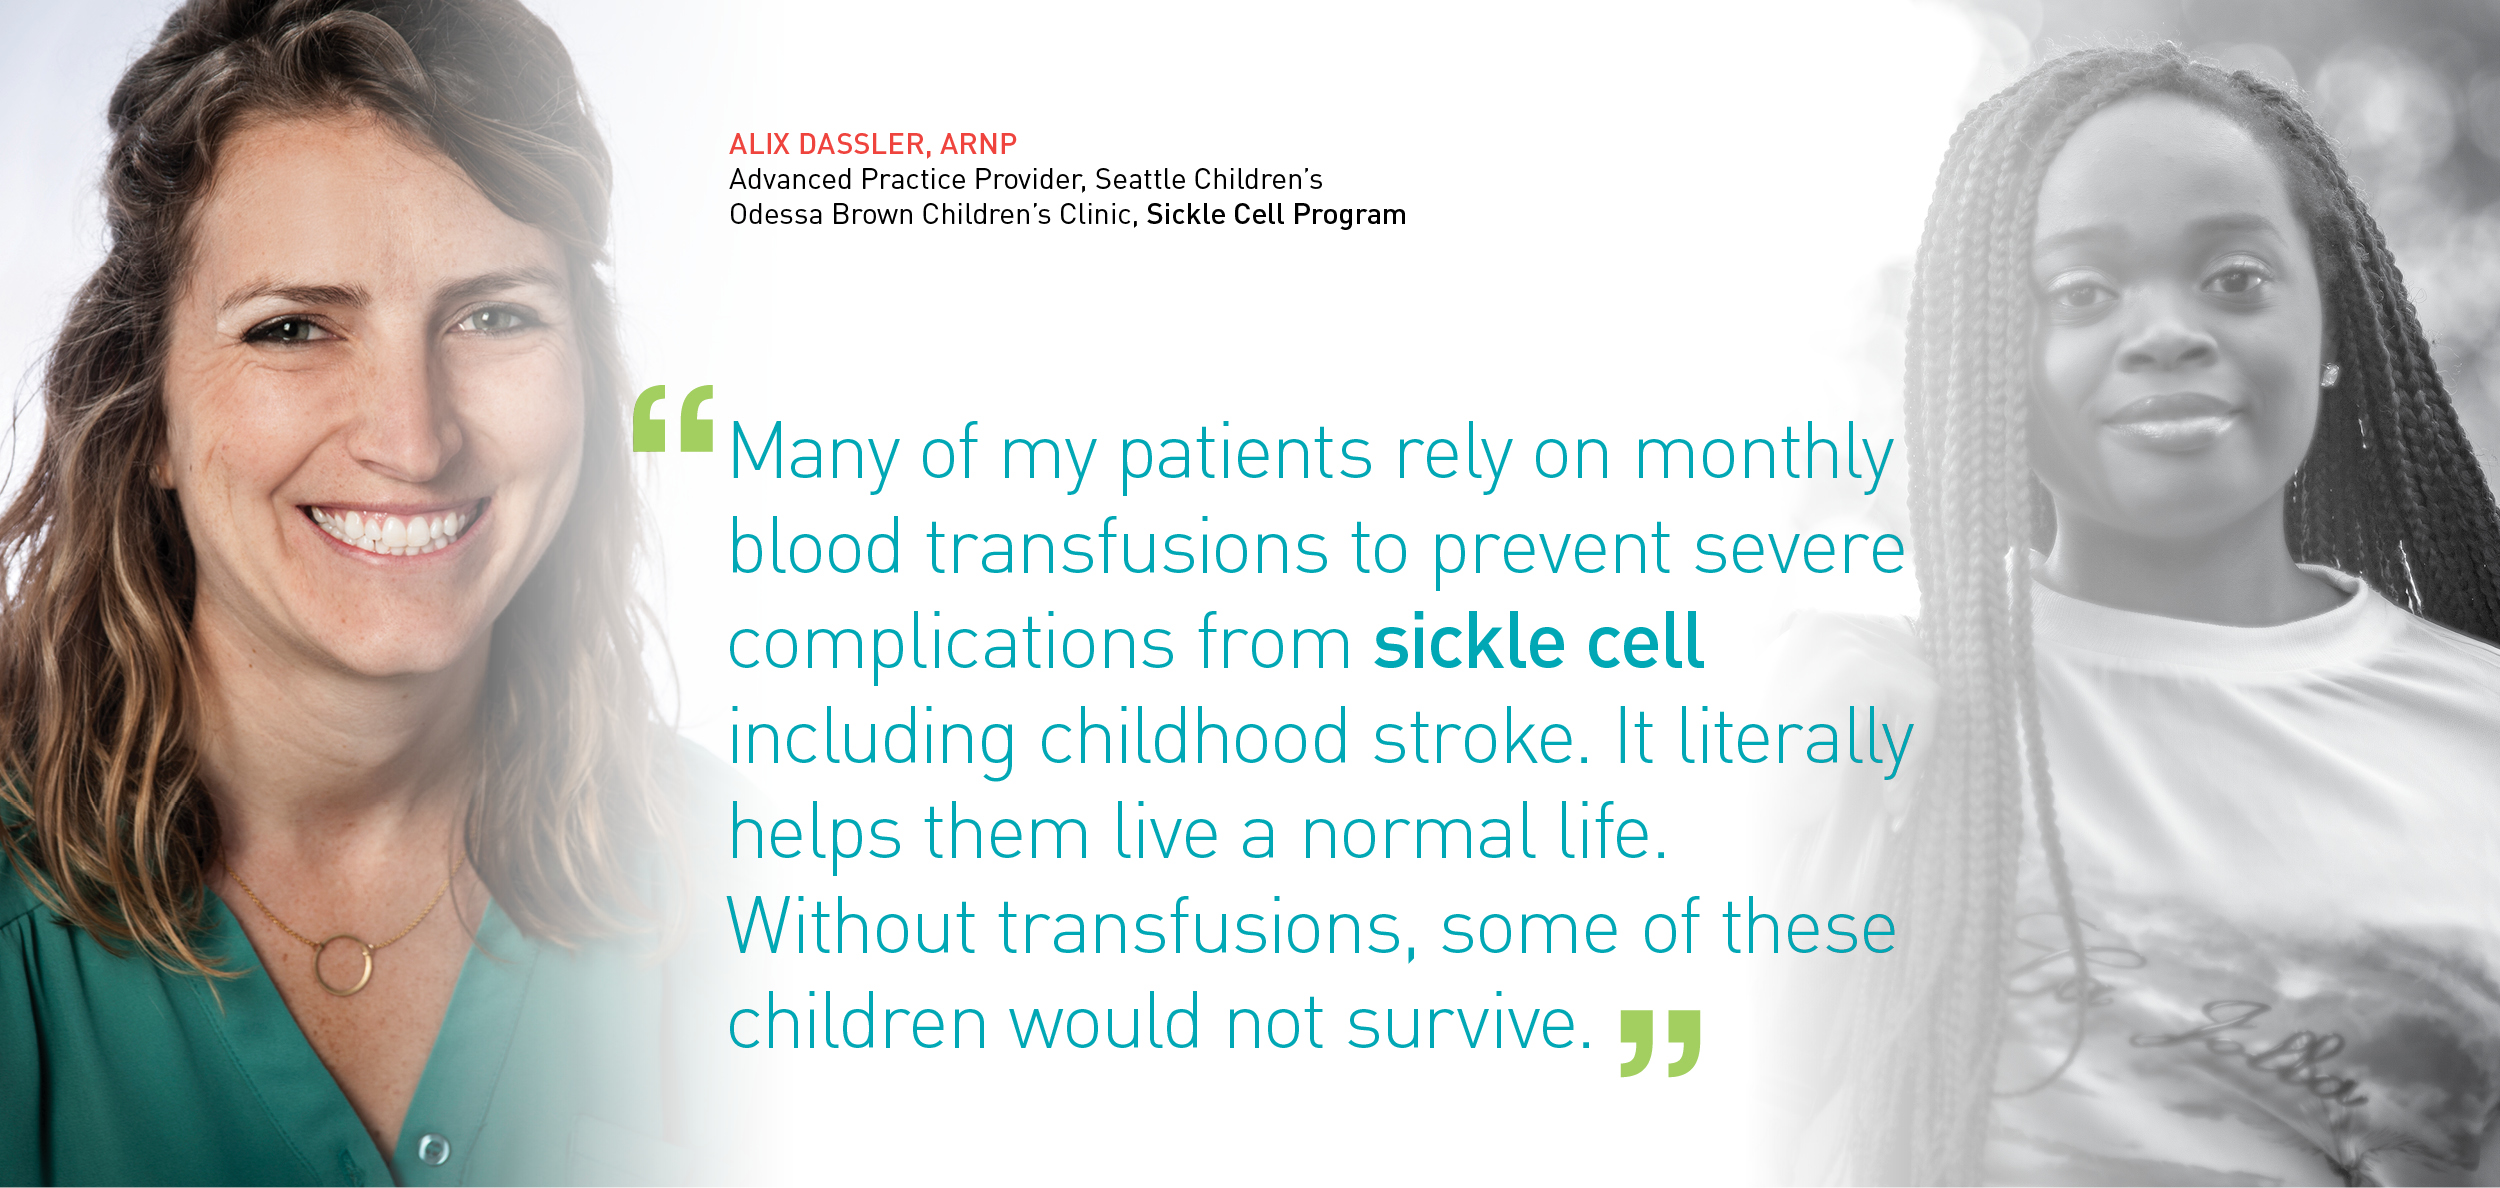 Blood donations help kids with sickle cell disease live a normal life